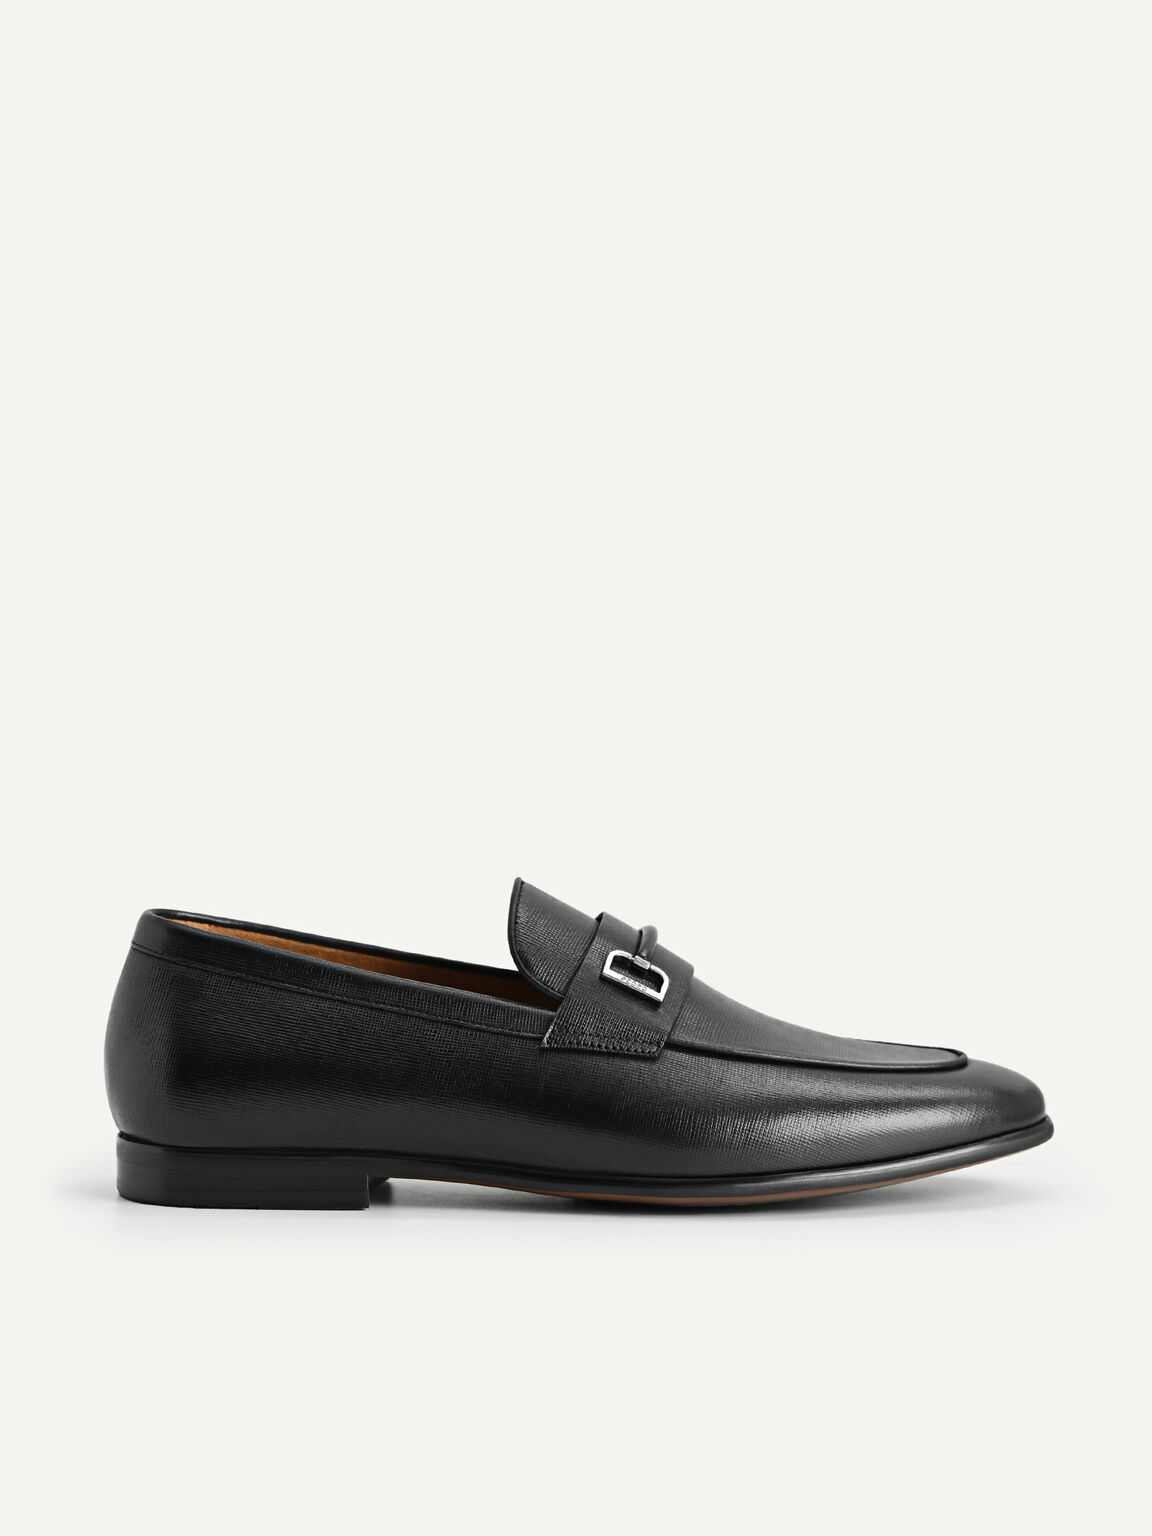 Black Textured Leather Loafers with Metal Bit - PEDRO SG